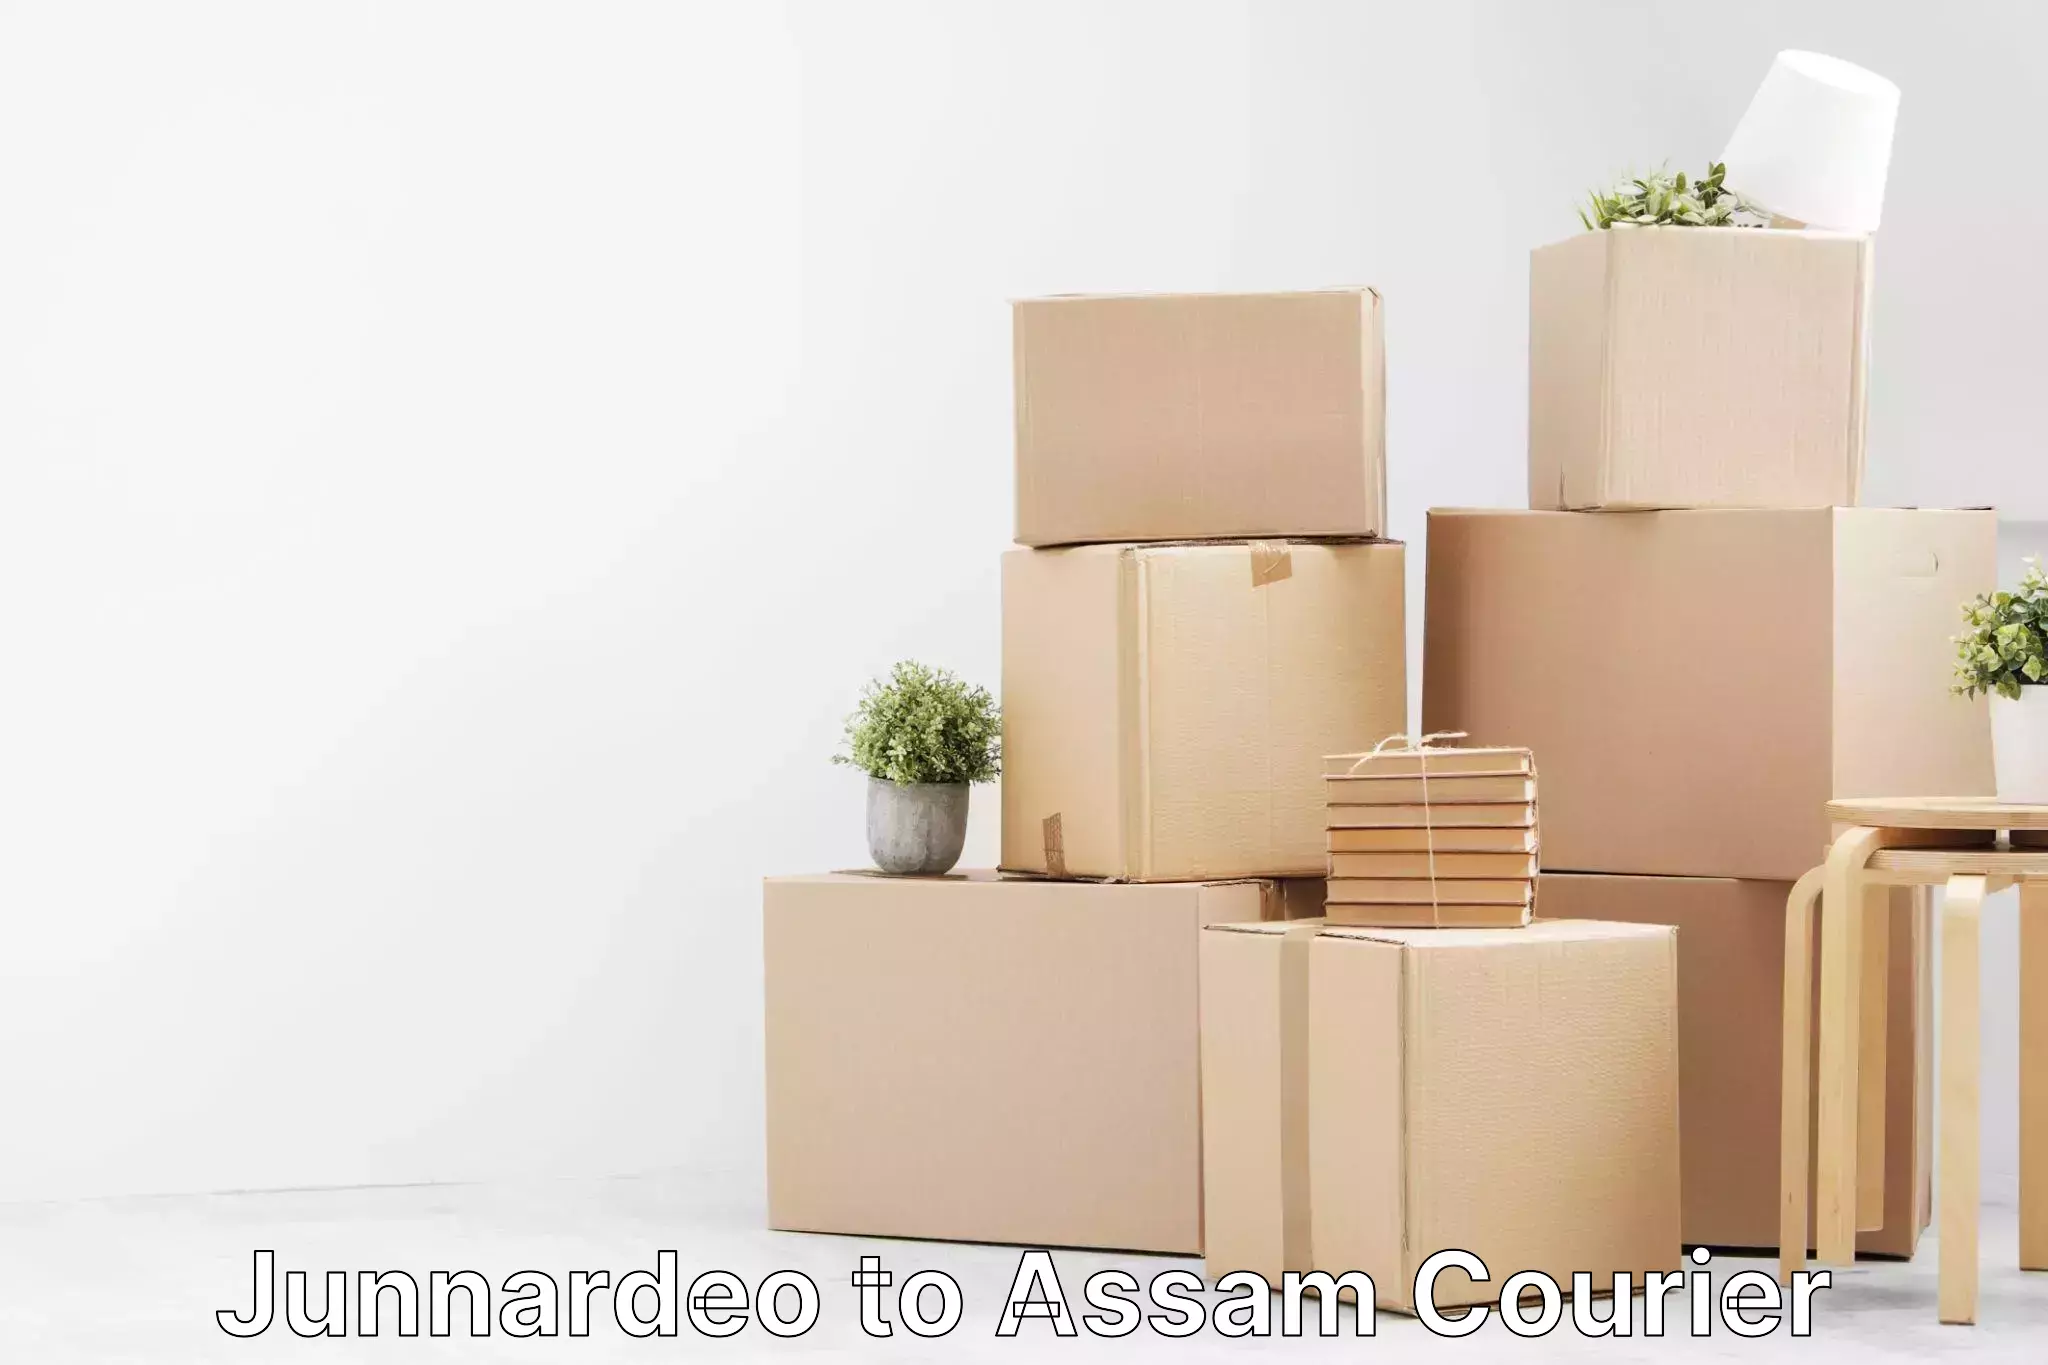 Automated parcel services Junnardeo to Assam